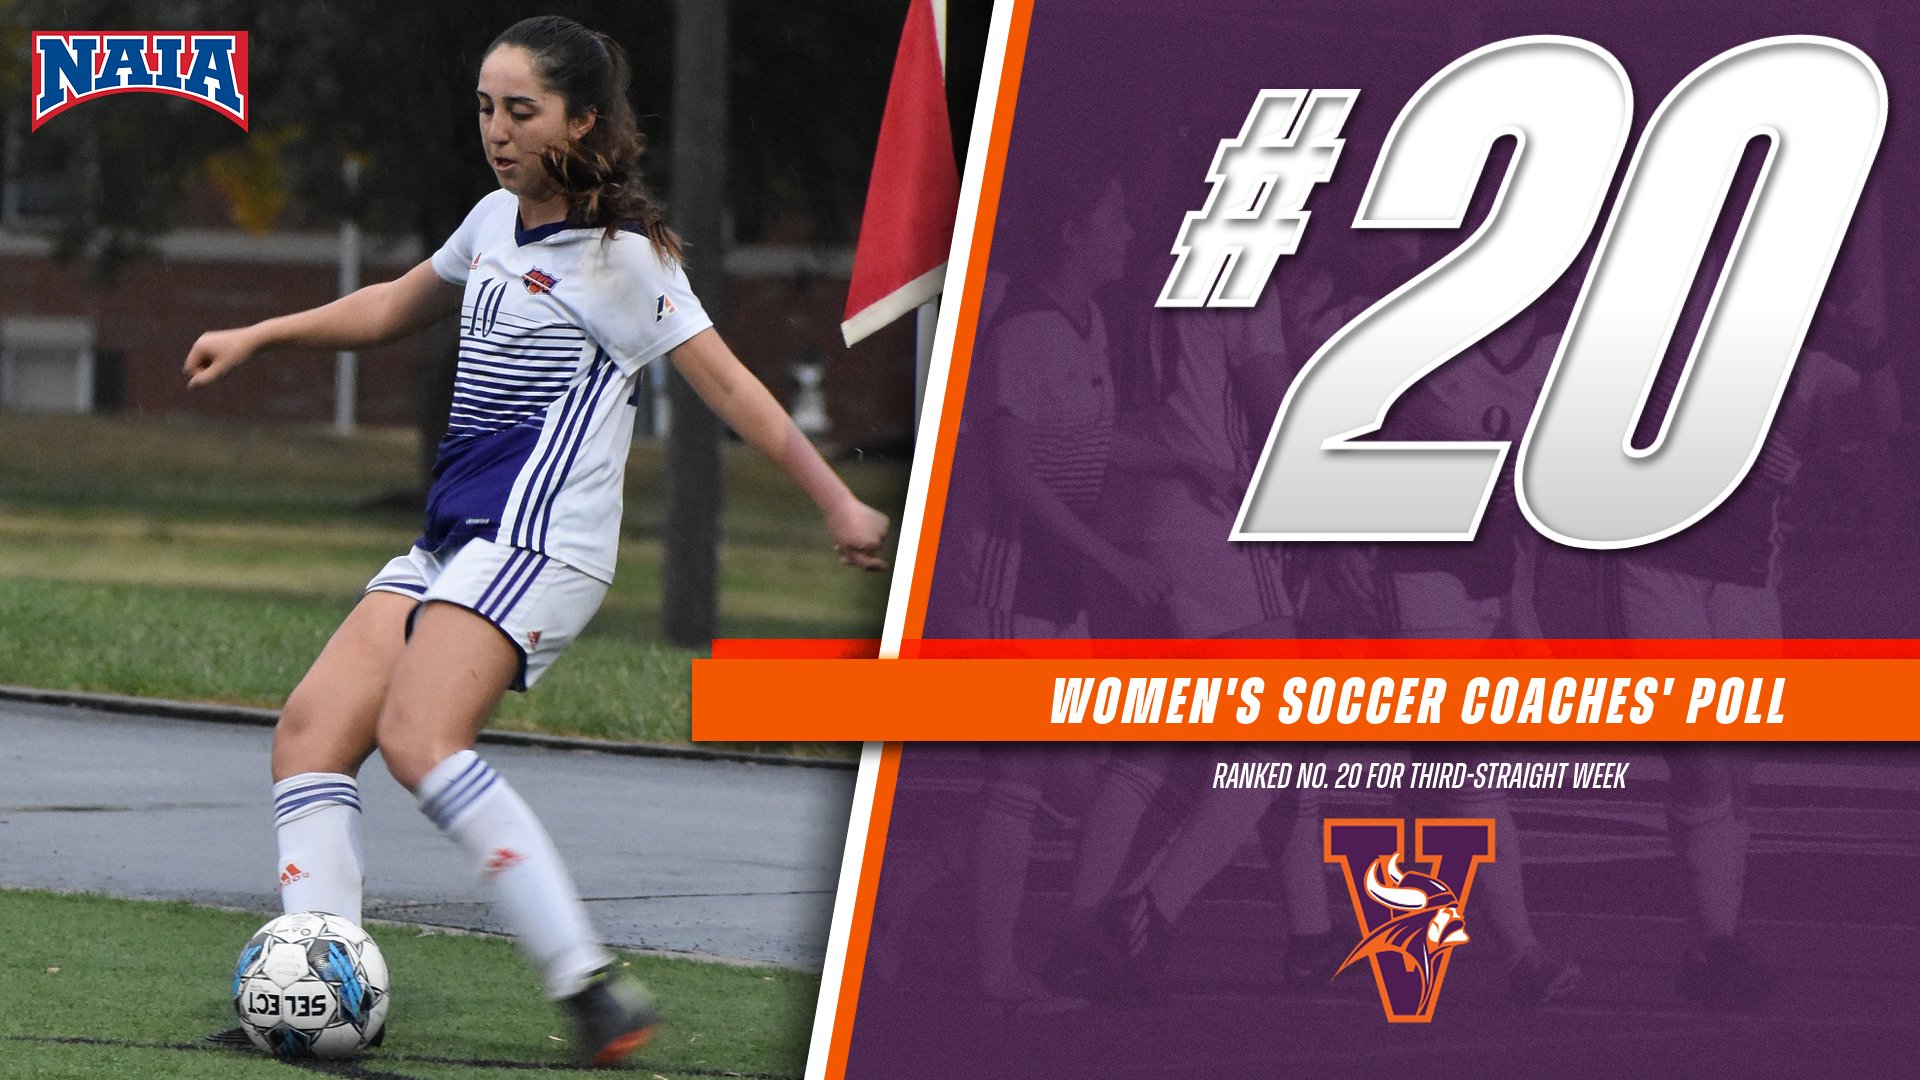 Women's Soccer Keeps Ranking in Latest Coaches' Poll